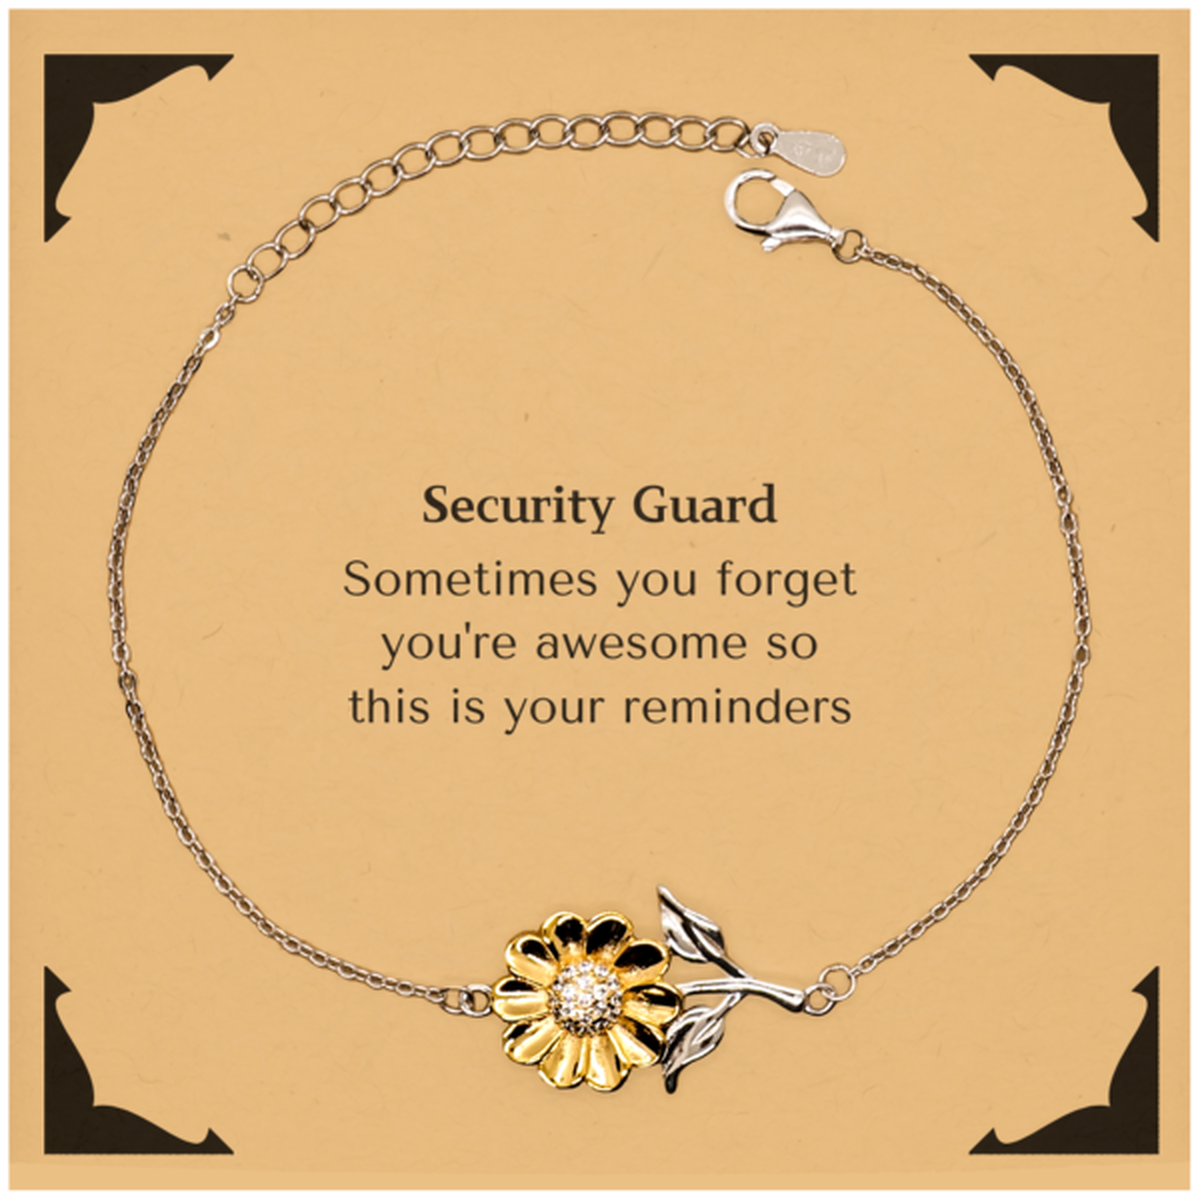 Sentimental Security Guard Sunflower Bracelet, Security Guard Sometimes you forget you're awesome so this is your reminders, Graduation Christmas Birthday Gifts for Security Guard, Men, Women, Coworkers